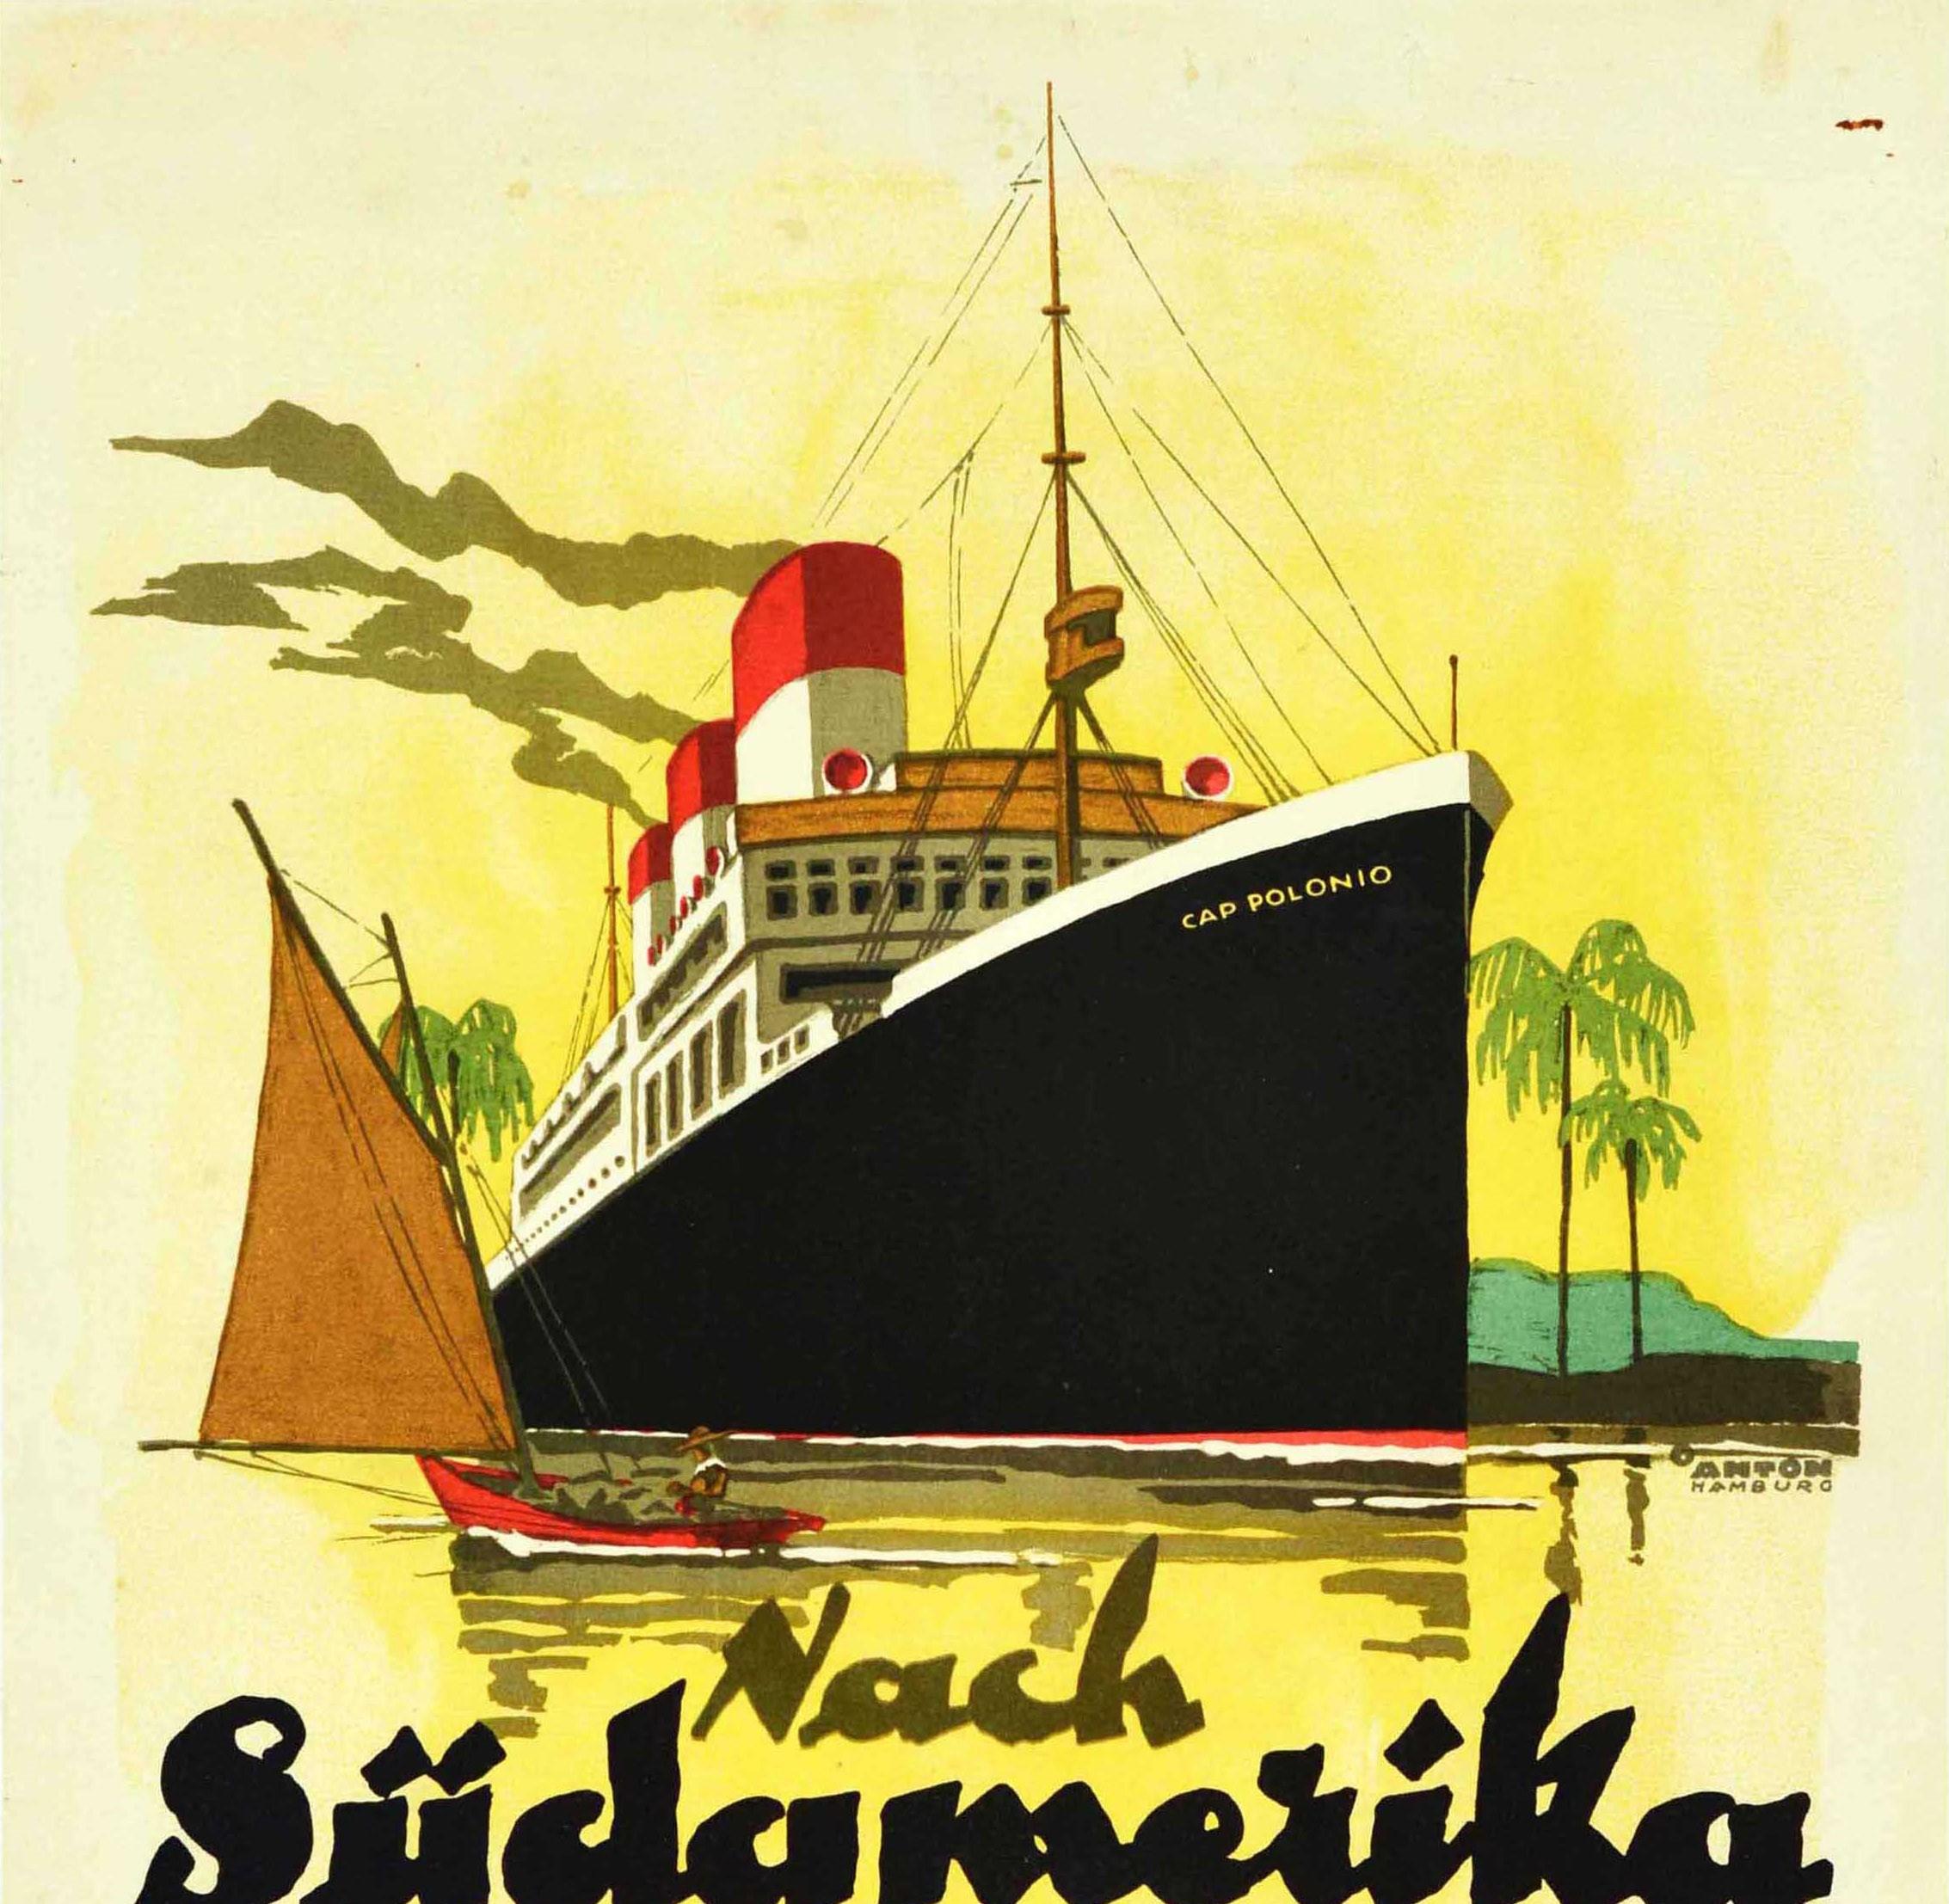 Original vintage cruise travel poster - To South America with Hamburg Sud / Nach Sudamerika mit der Hamburg Sud - featuring stunning artwork by the German painter and graphic artist Ottomar Anton (1895-1976) of the SS Cap Polonio ocean liner on